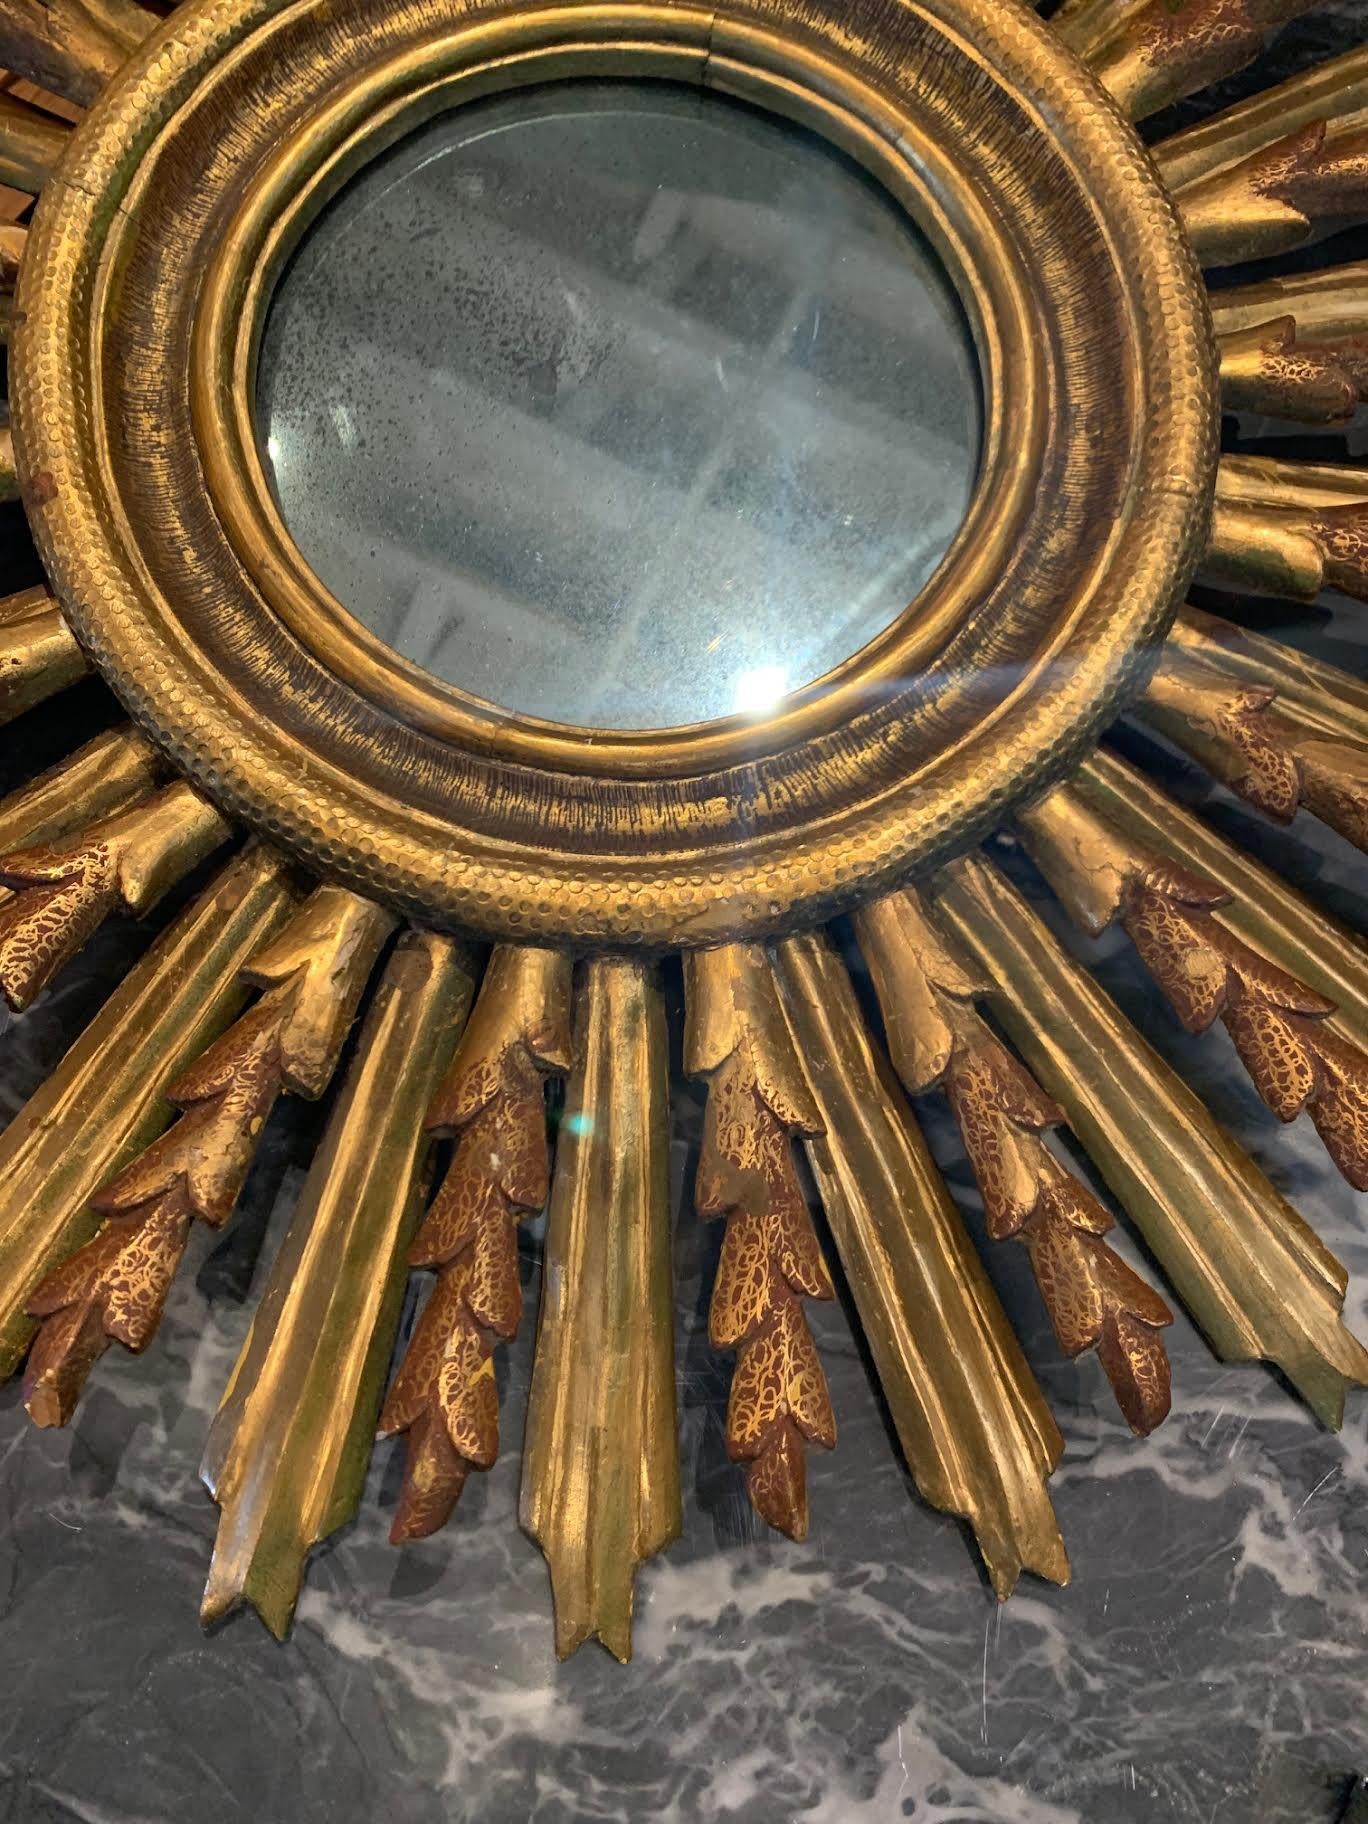 1920's Spanish gold gilt wooden frame in starburst design.
Double spoke design.
Beautiful natural patina.
Three different starburst designs available.